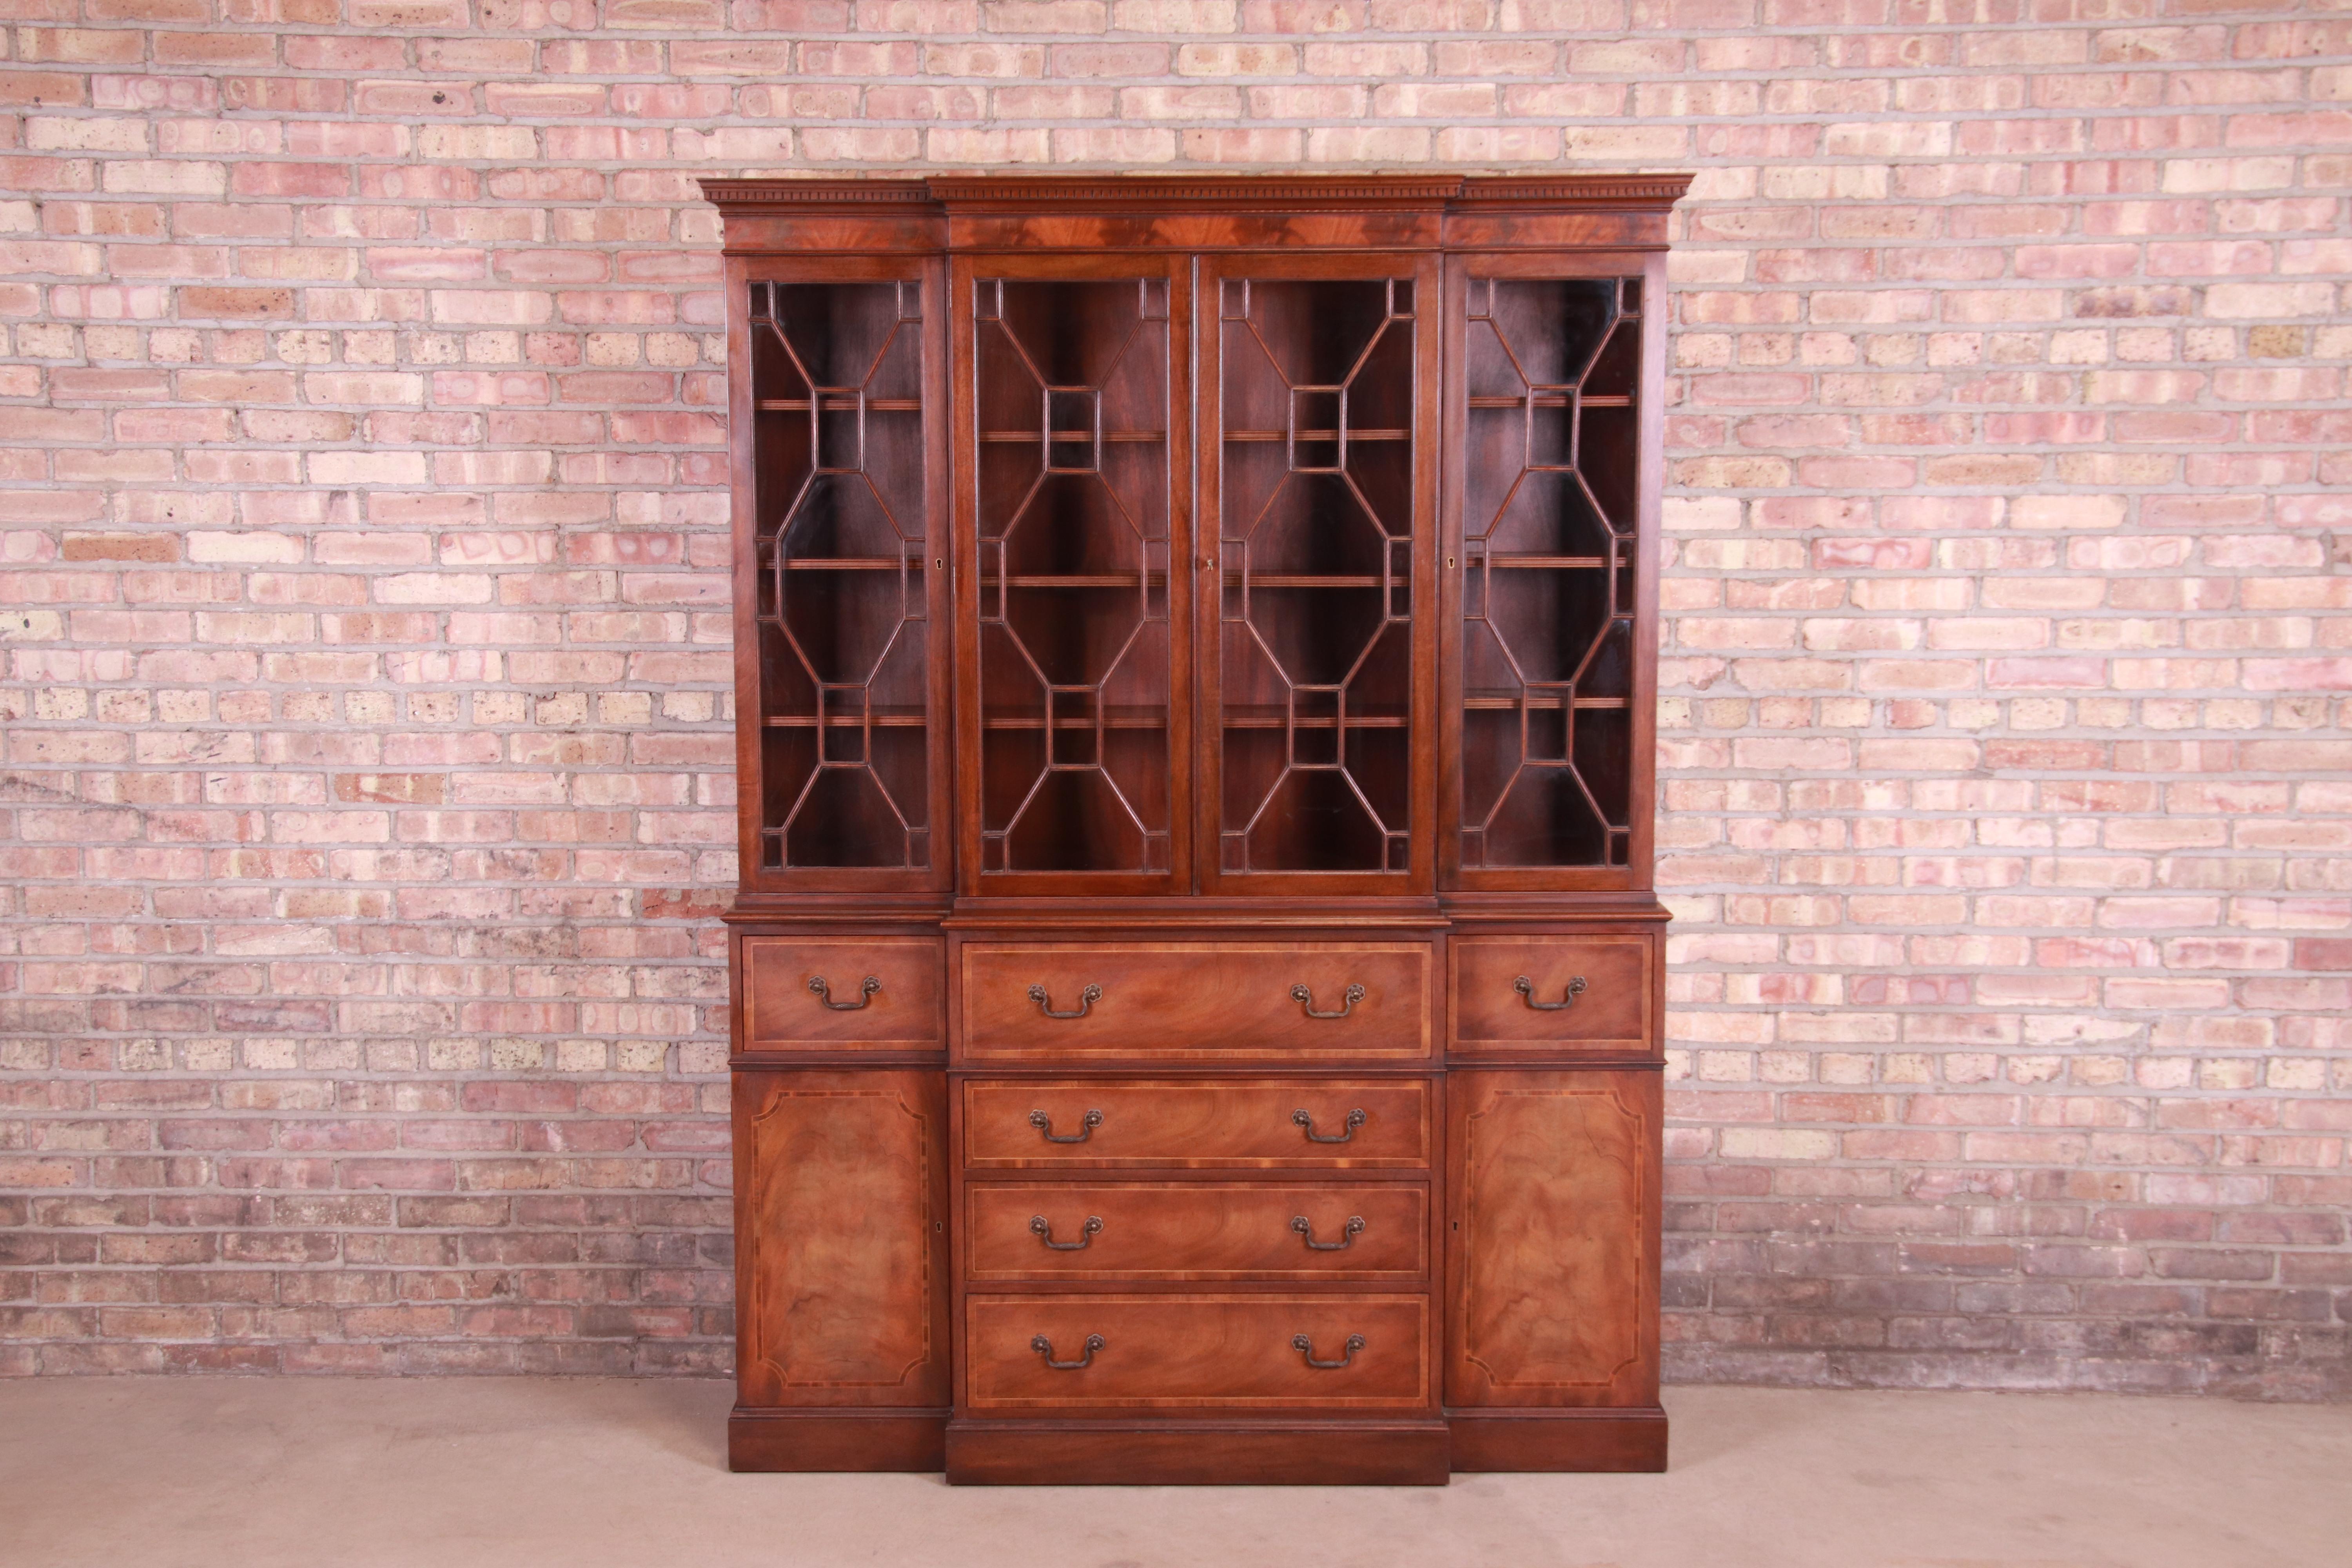 A gorgeous English Georgian style breakfront bookcase cabinet with drop-front secretary desk

By Baker Furniture

USA, mid-20th century

Mahogany, with mullioned glass front doors, original brass hardware, and embossed leather writing